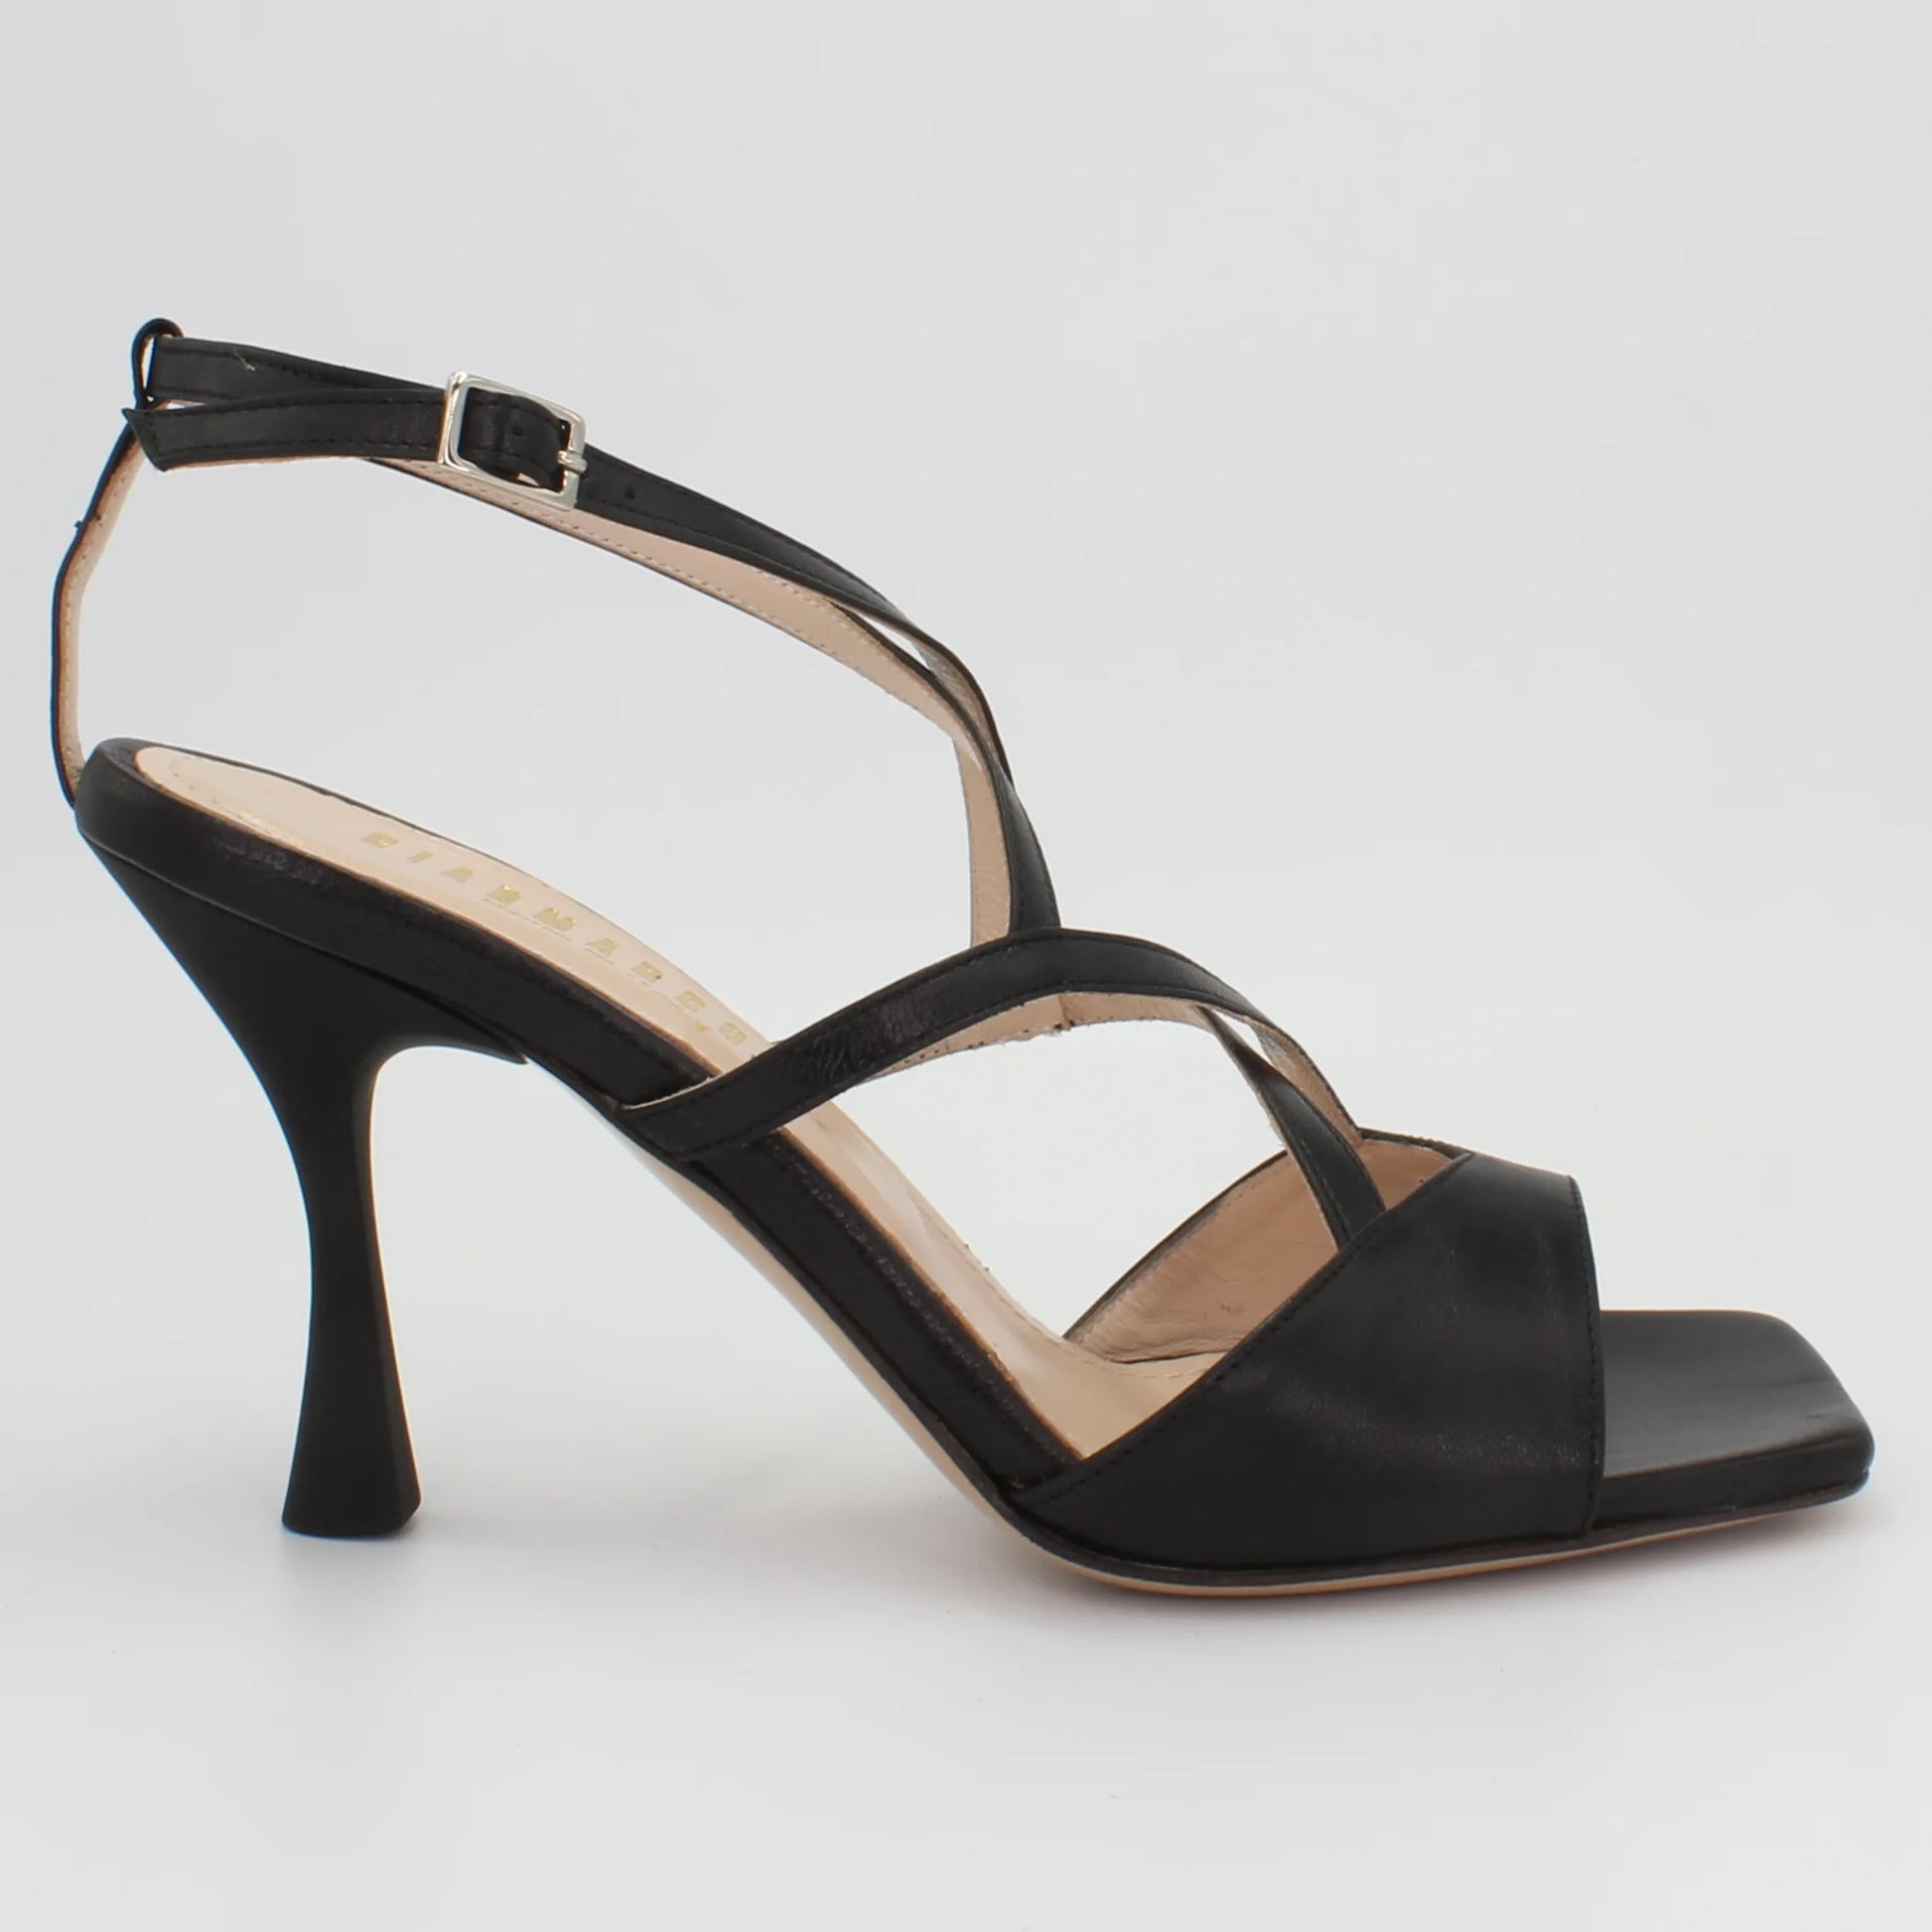 Shop Handmade Italian Leather Strappy High Heels in Nero (MP26102) or browse our range of hand-made Italian shoes for women in leather or suede in-store at Aliverti Cape Town, or shop online. We deliver in South Africa & offer multiple payment plans as well as accept multiple safe & secure payment methods.